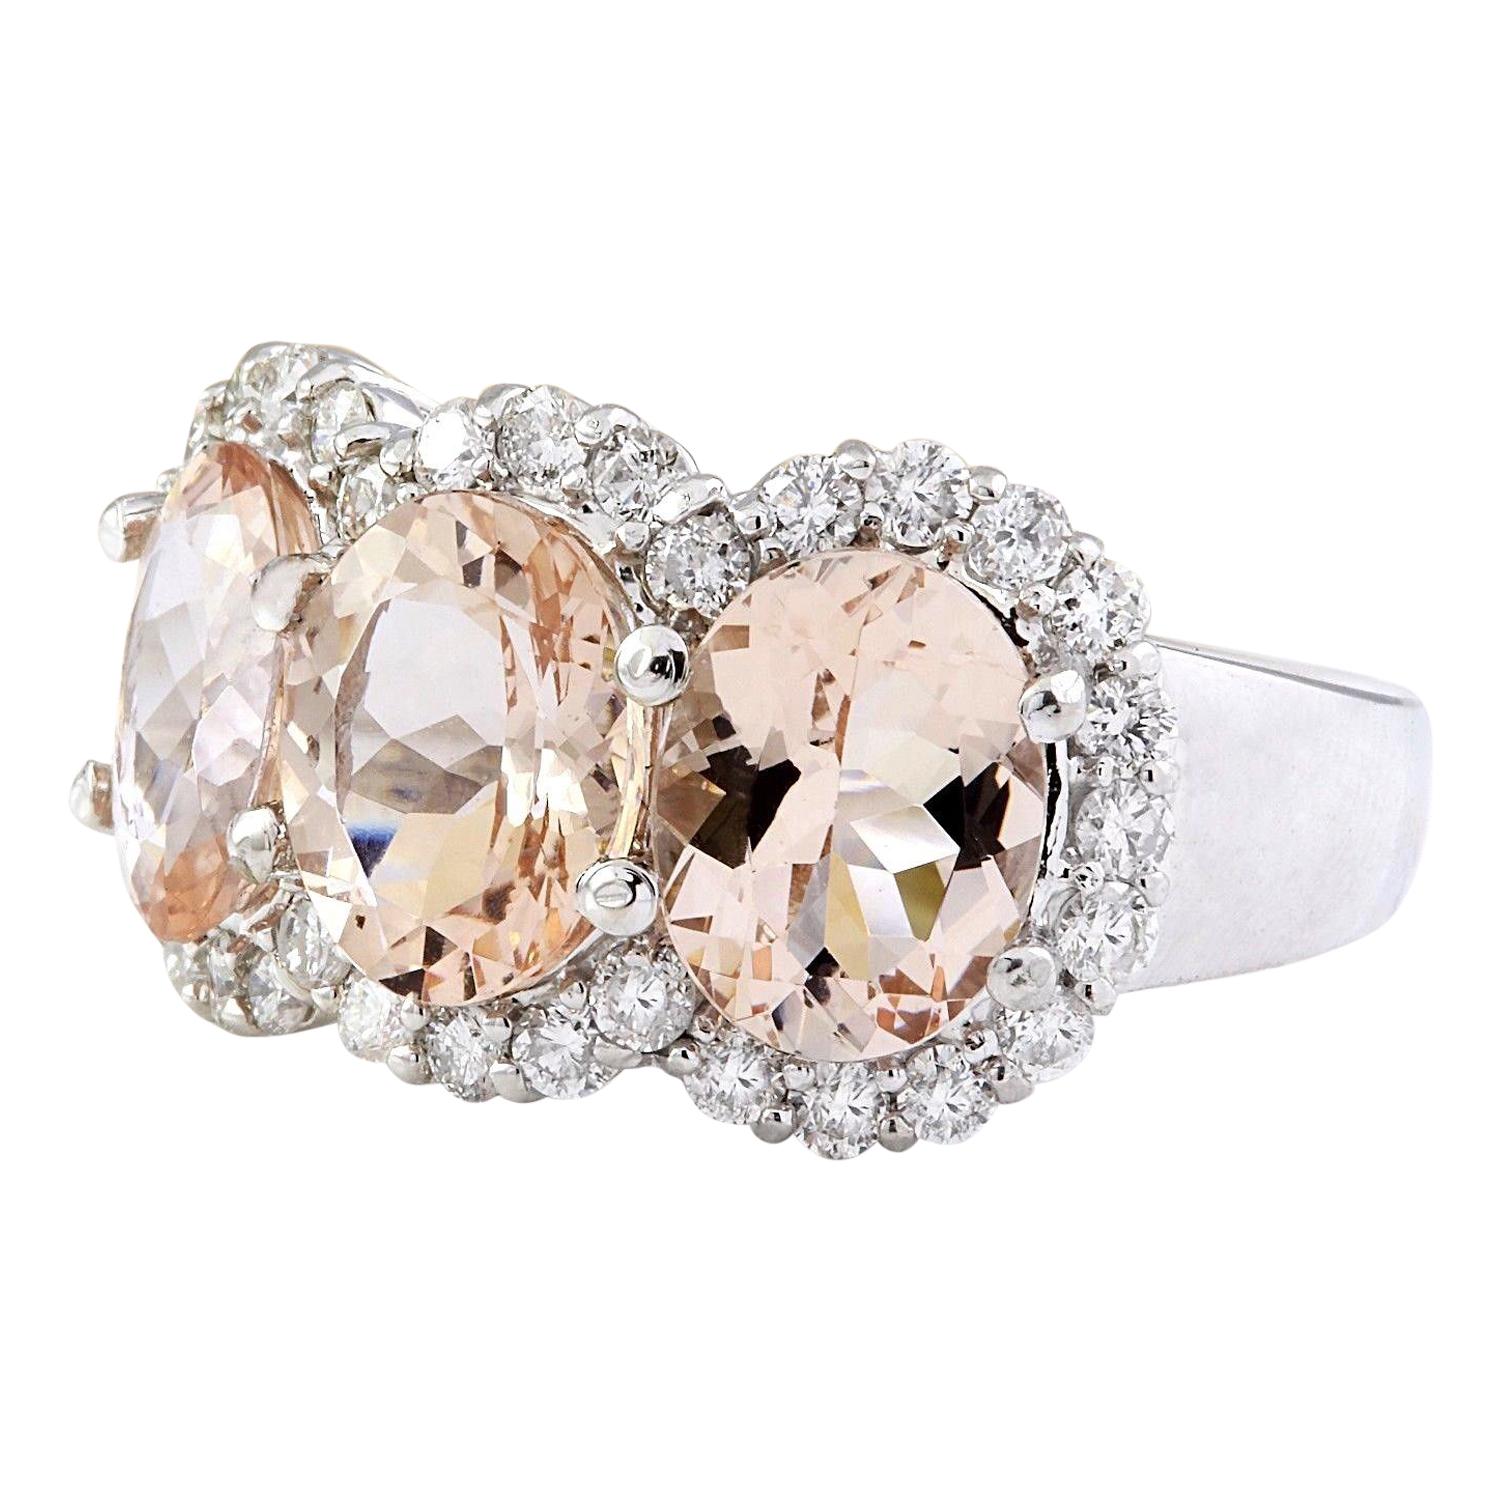 8.23 Carat Natural Morganite 14K Solid White Gold Diamond Ring
 Item Type: Ring
 Item Style: Cocktail
 Material: 14K White Gold
 Mainstone: Morganite
 Stone Color: Peach
 Stone Weight: 7.48 Carat
 Stone Shape: Oval
 Stone Quantity: 3
 Stone